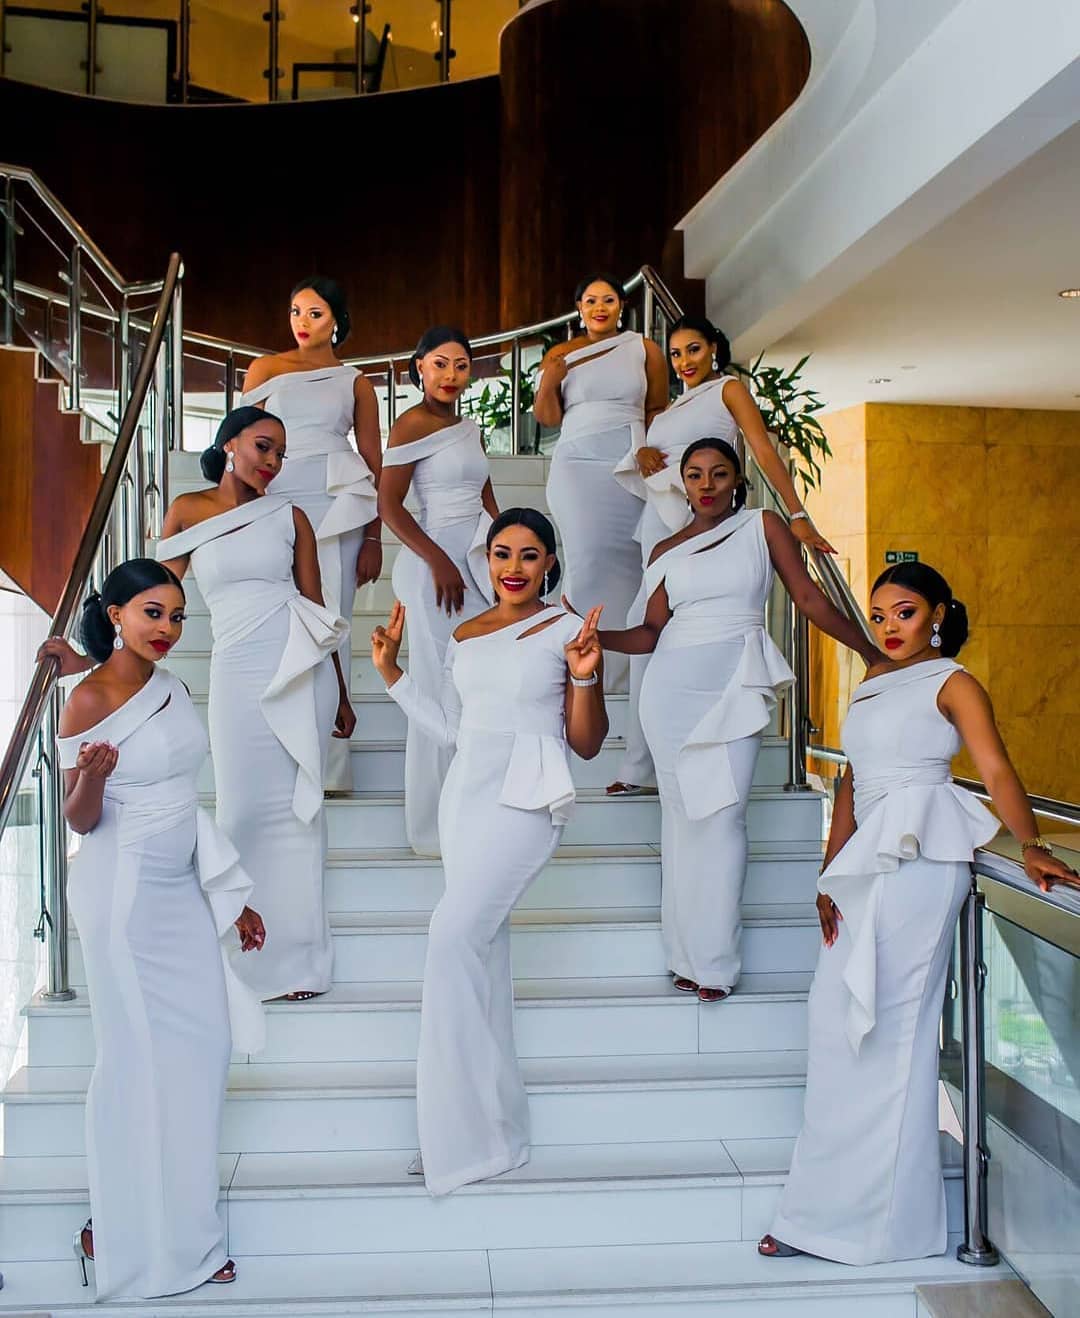 Let Your Girls Slay In The Best Bridesmaids Dresses